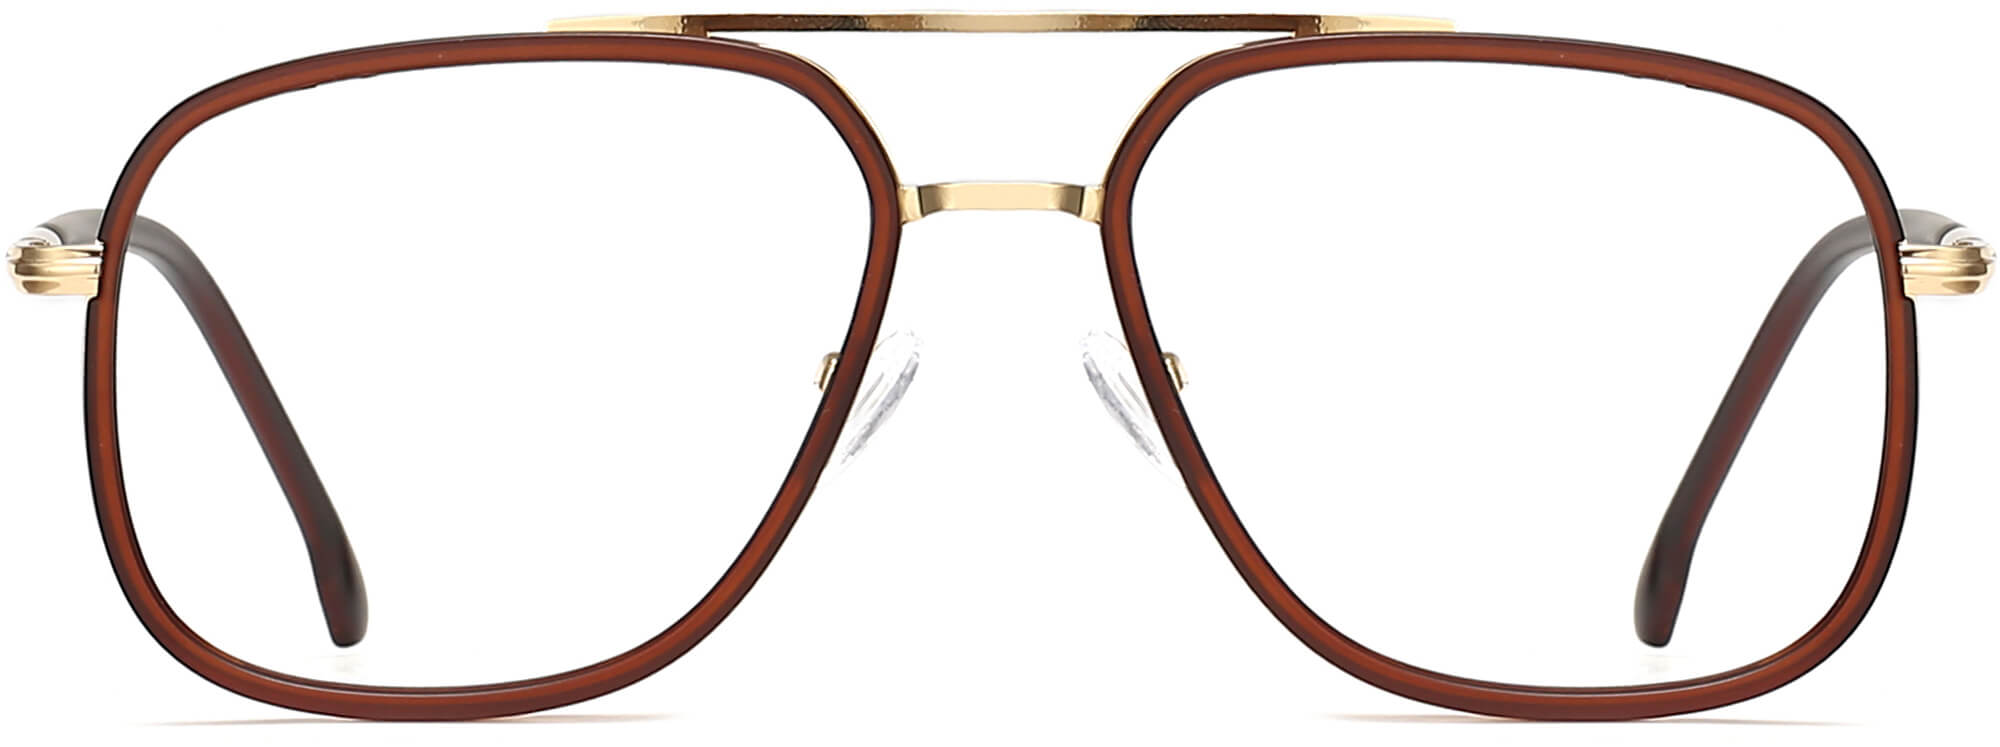 Niko Square Brown Eyeglasses from ANRRI, front view